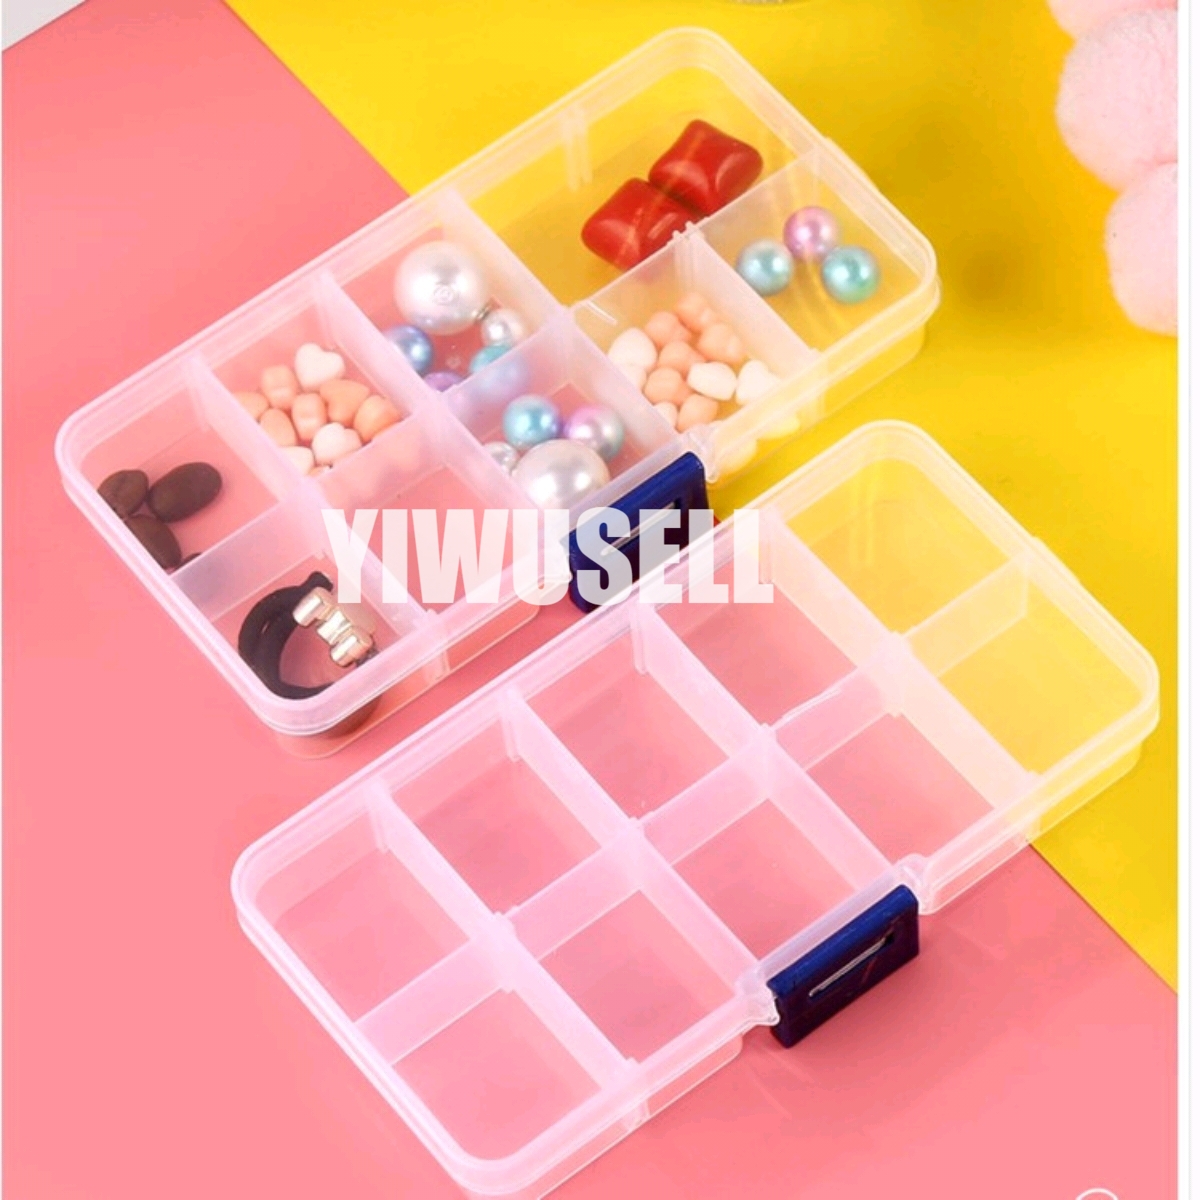 https://yiwusell.cn/wp-content/uploads/2023/03/Best-Transparent-Plastic-Grid-Box-Storage-Organizer-for-sale-015yiwusell.cn_.jpg